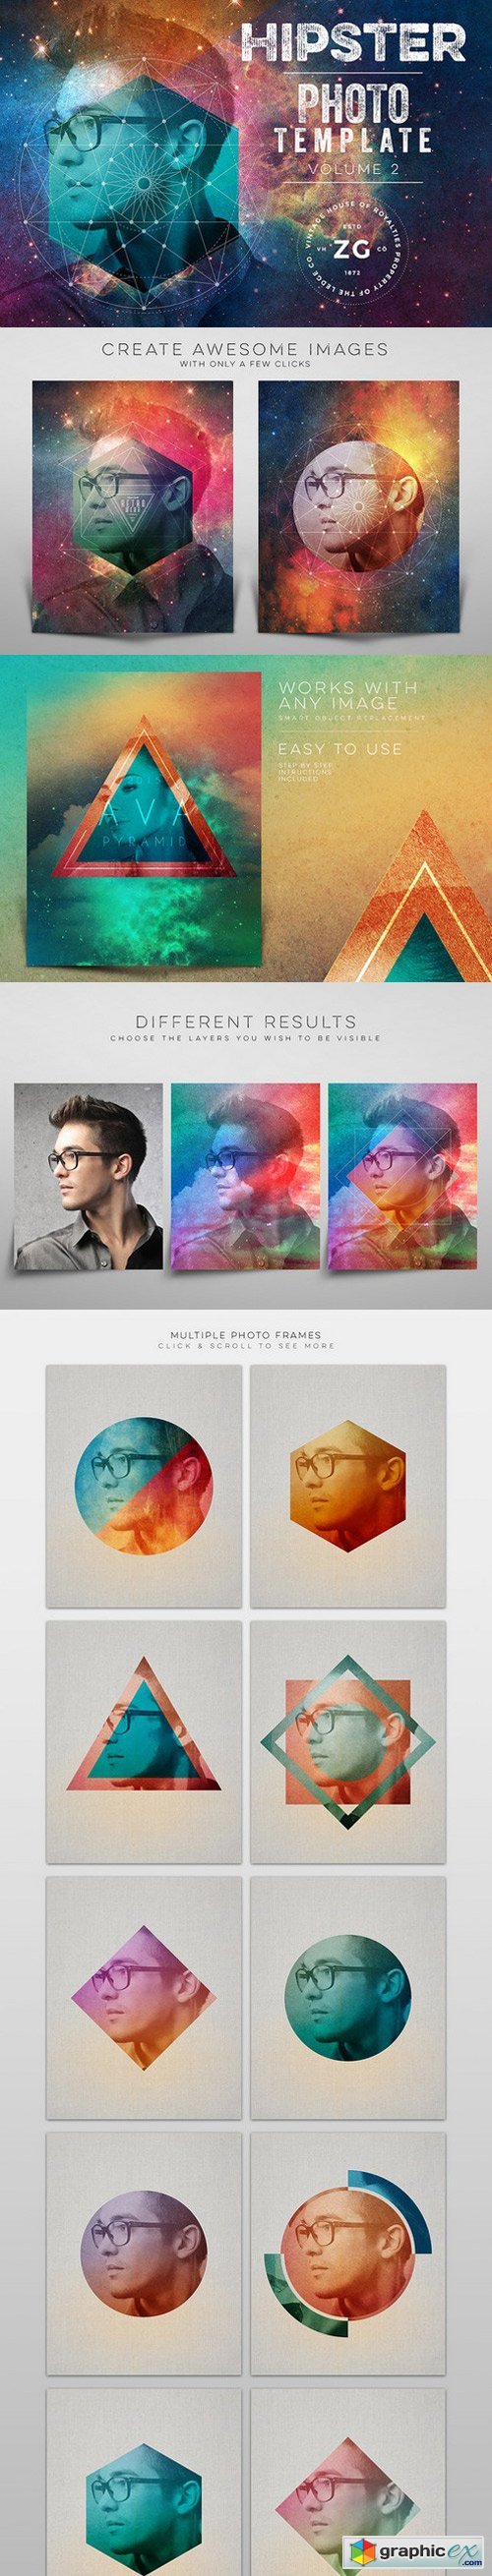 Hipster Photo Template V.2